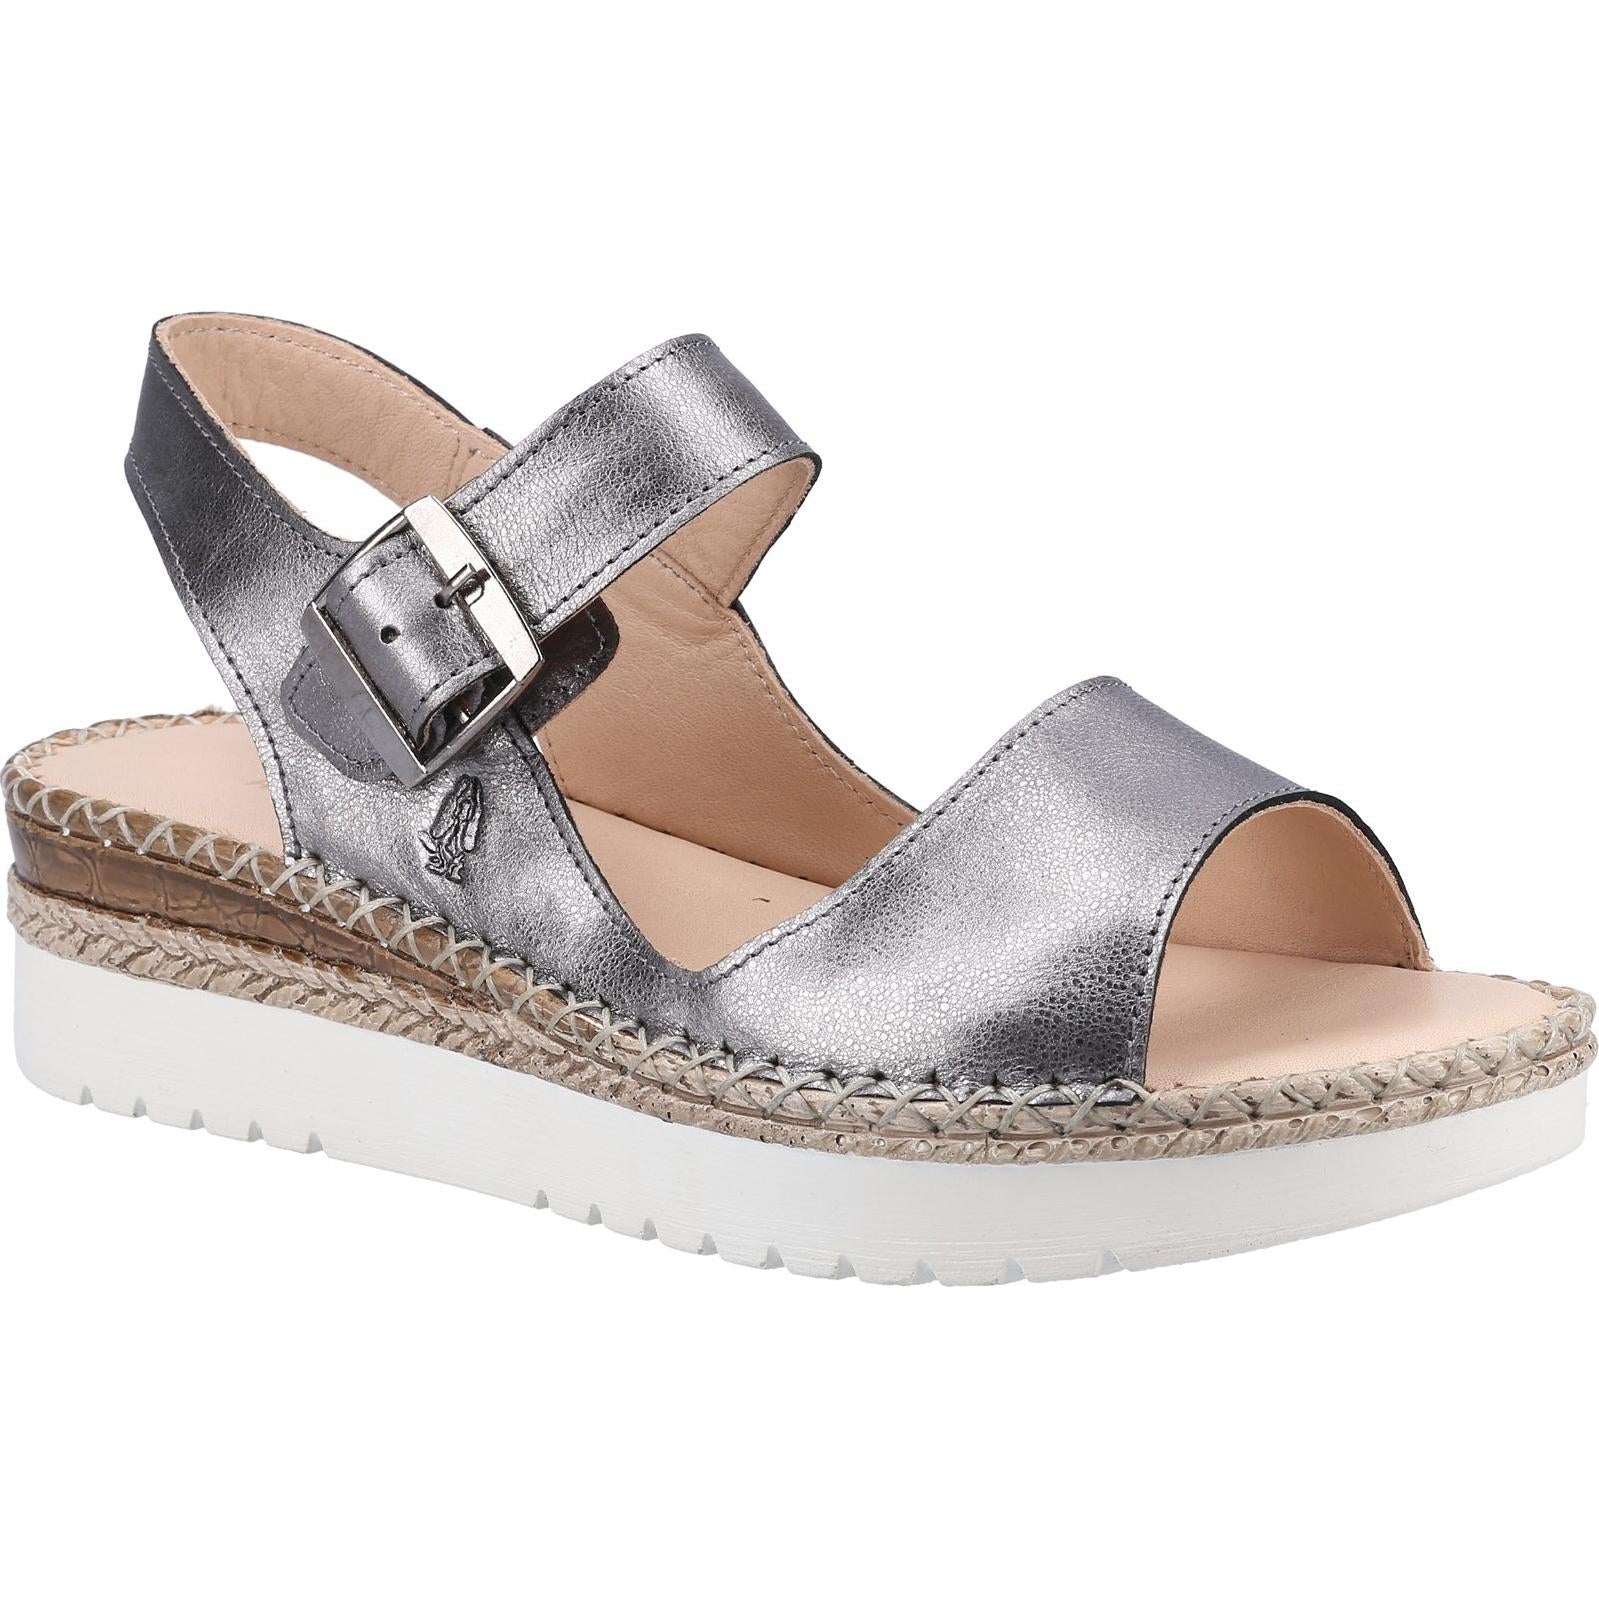 Hush Puppies Stacey Sandal